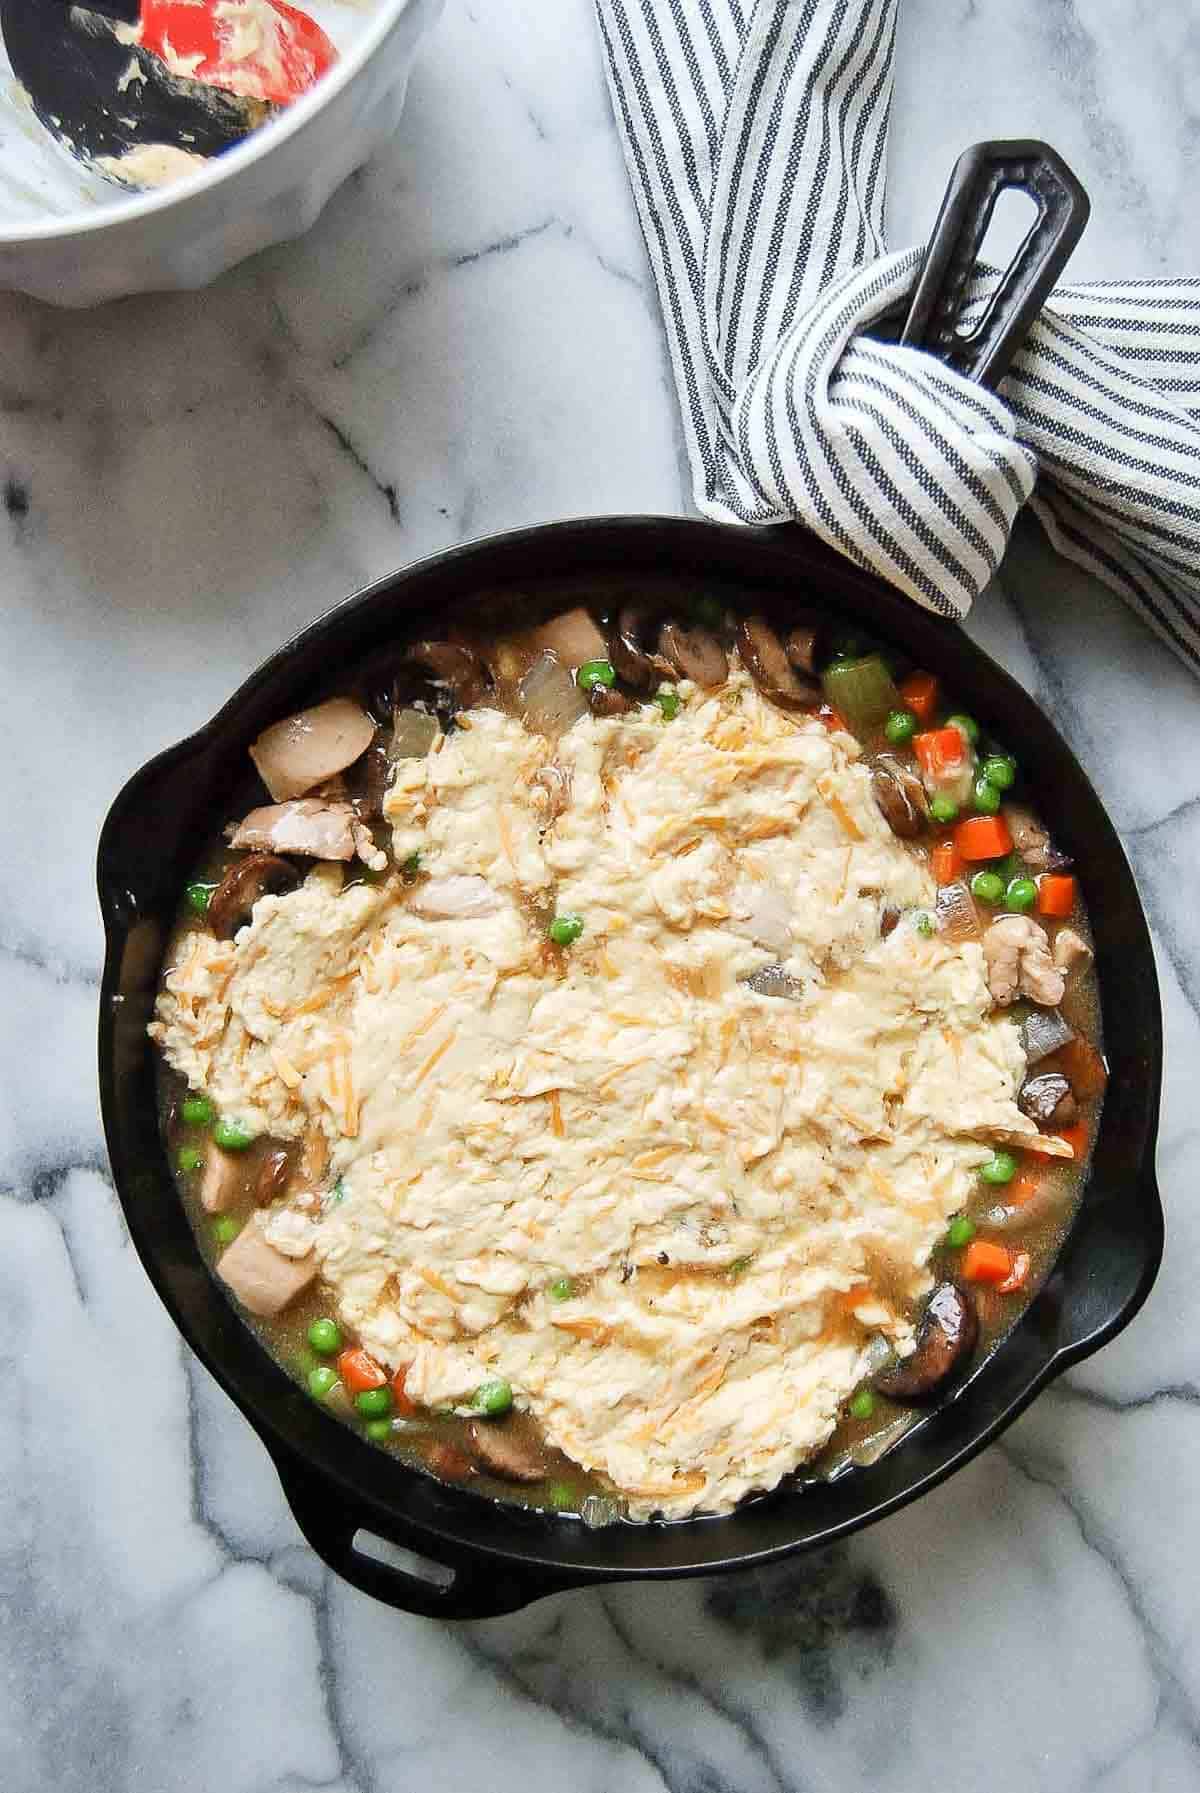 chicken cobbler with batter spread across the top.